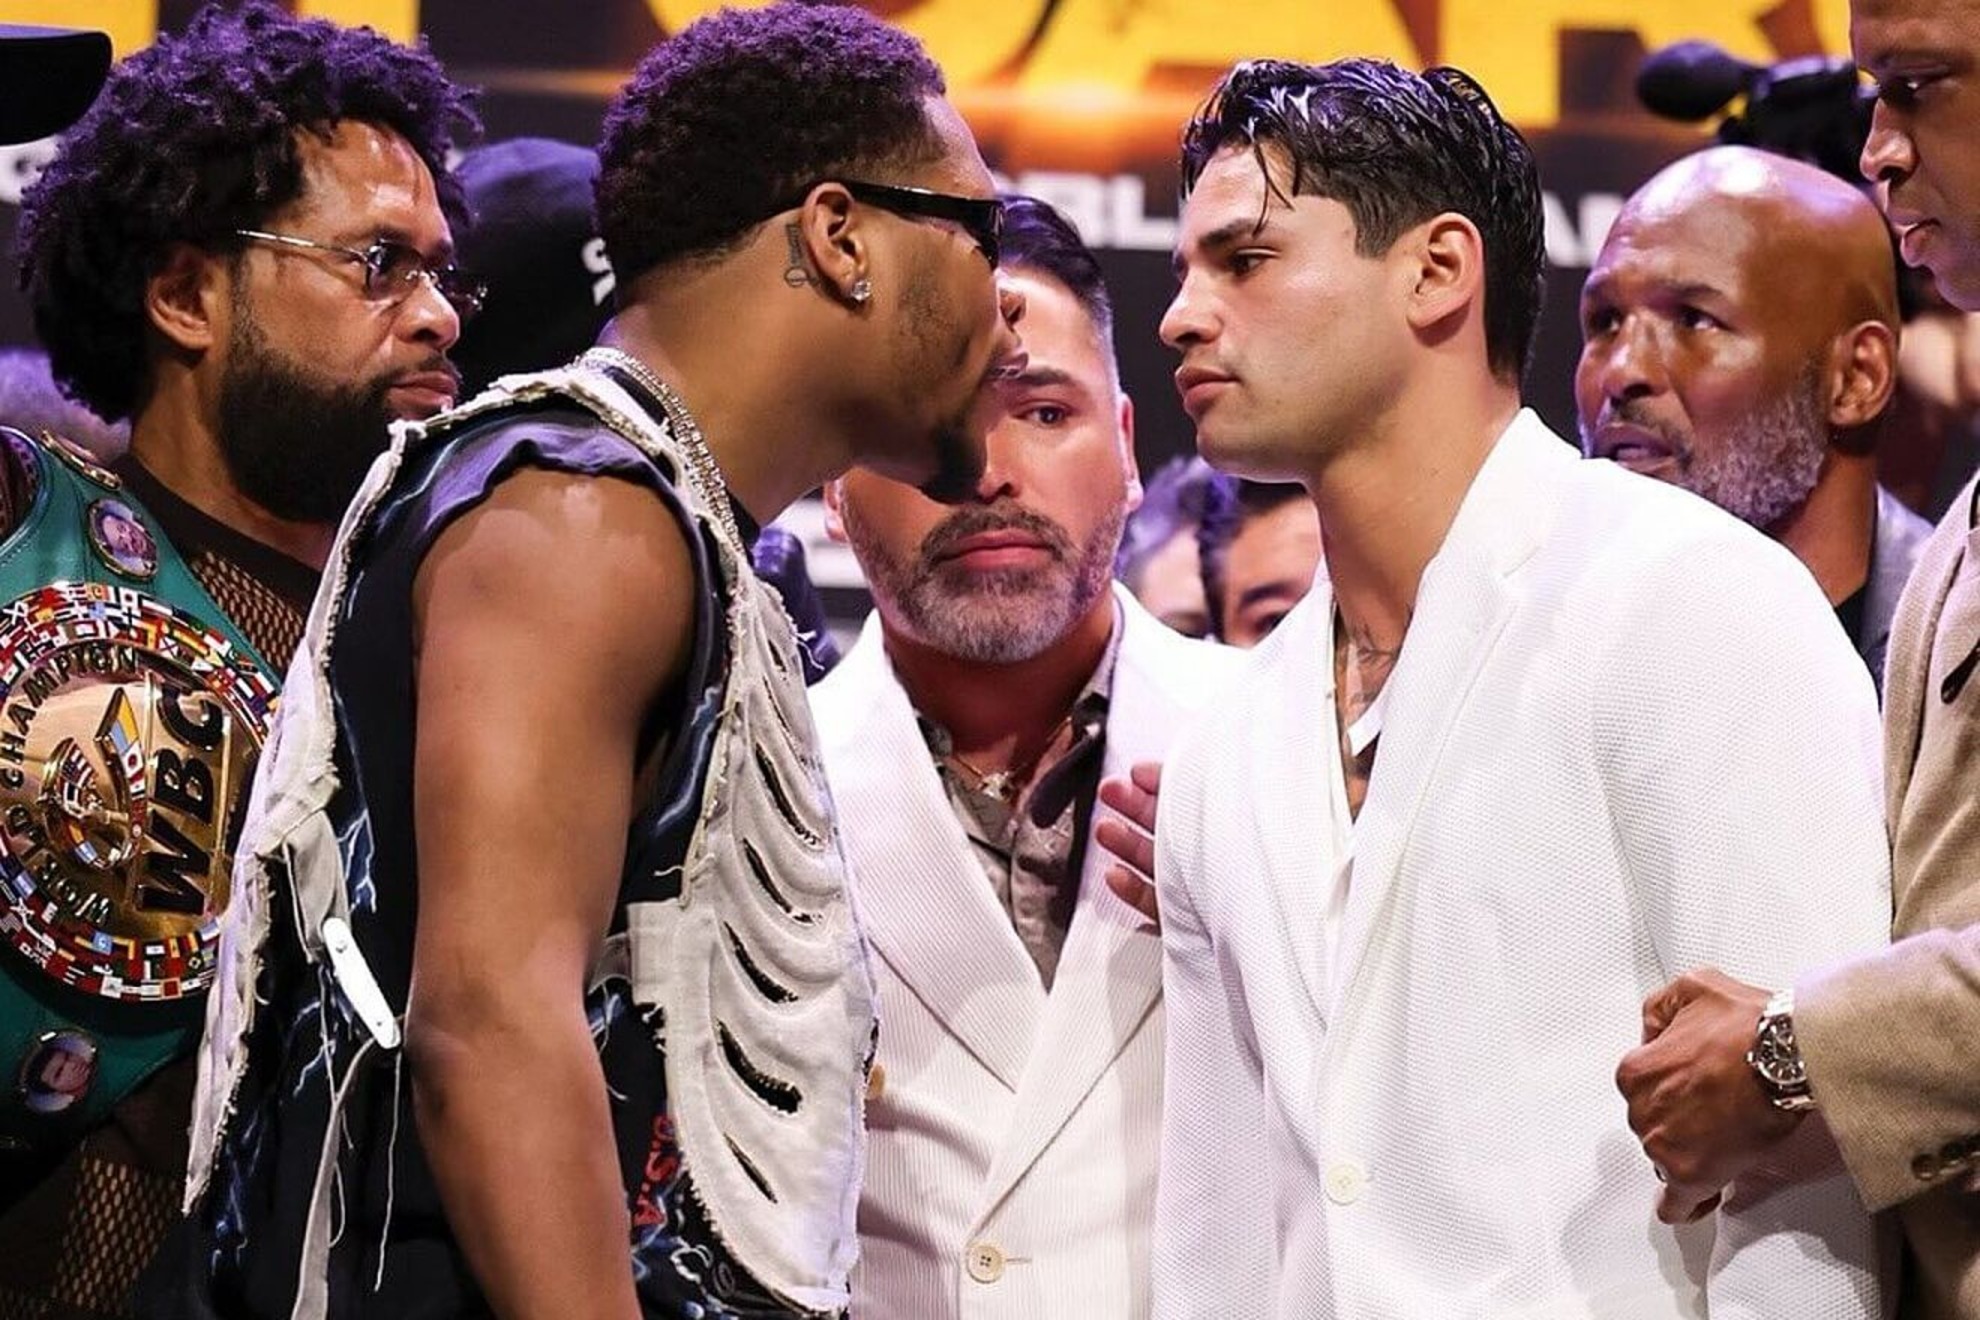 Devin Haney and Ryan Garcia in their last face-to-face meeting.